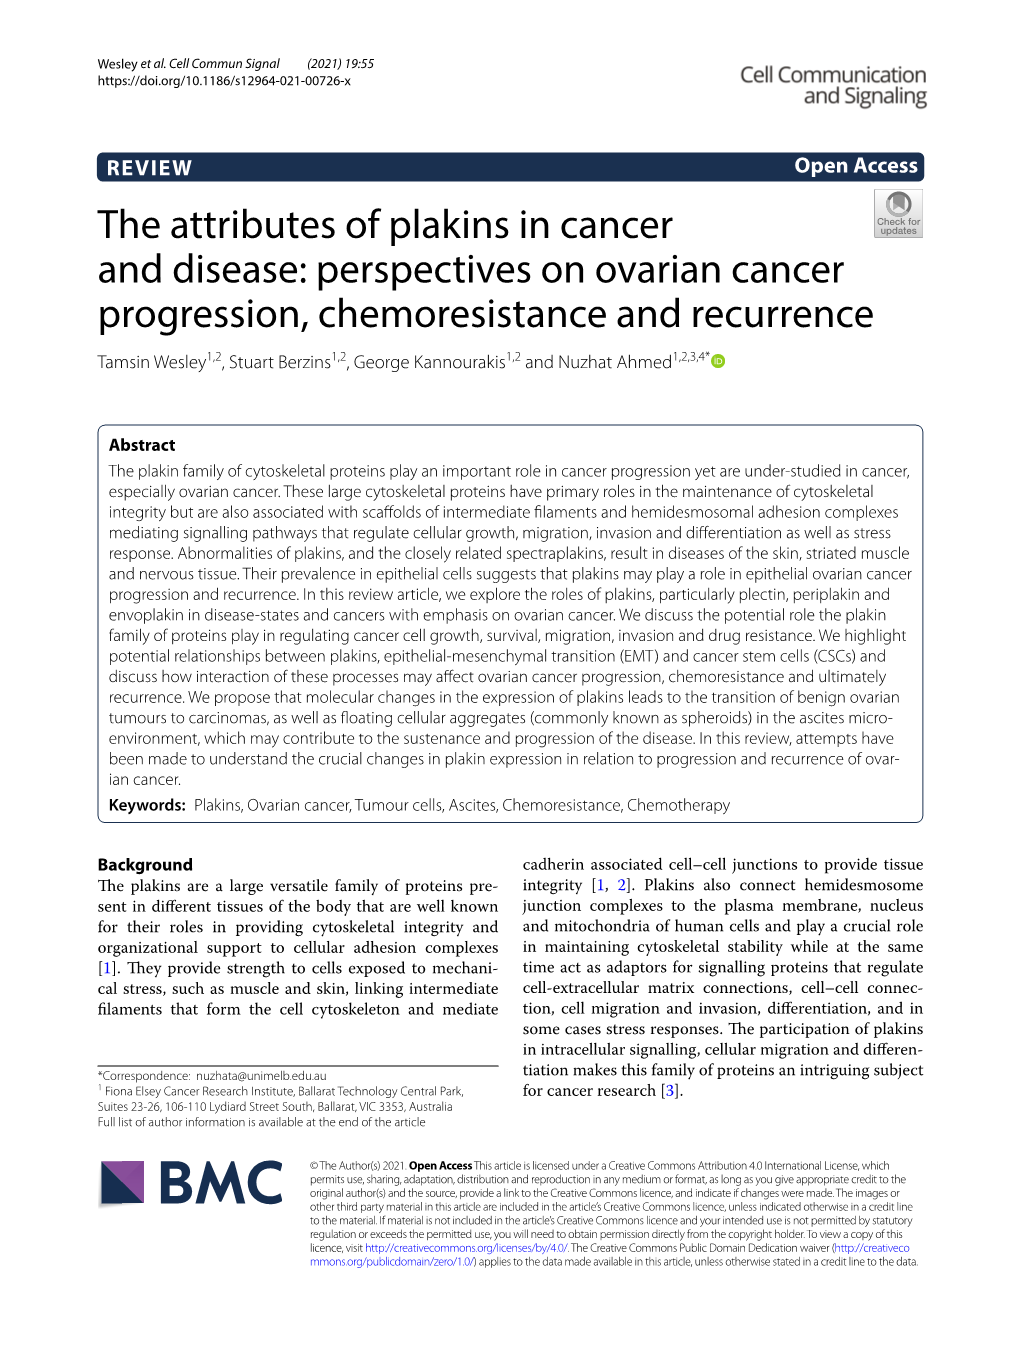 The Attributes of Plakins in Cancer and Disease: Perspectives on Ovarian